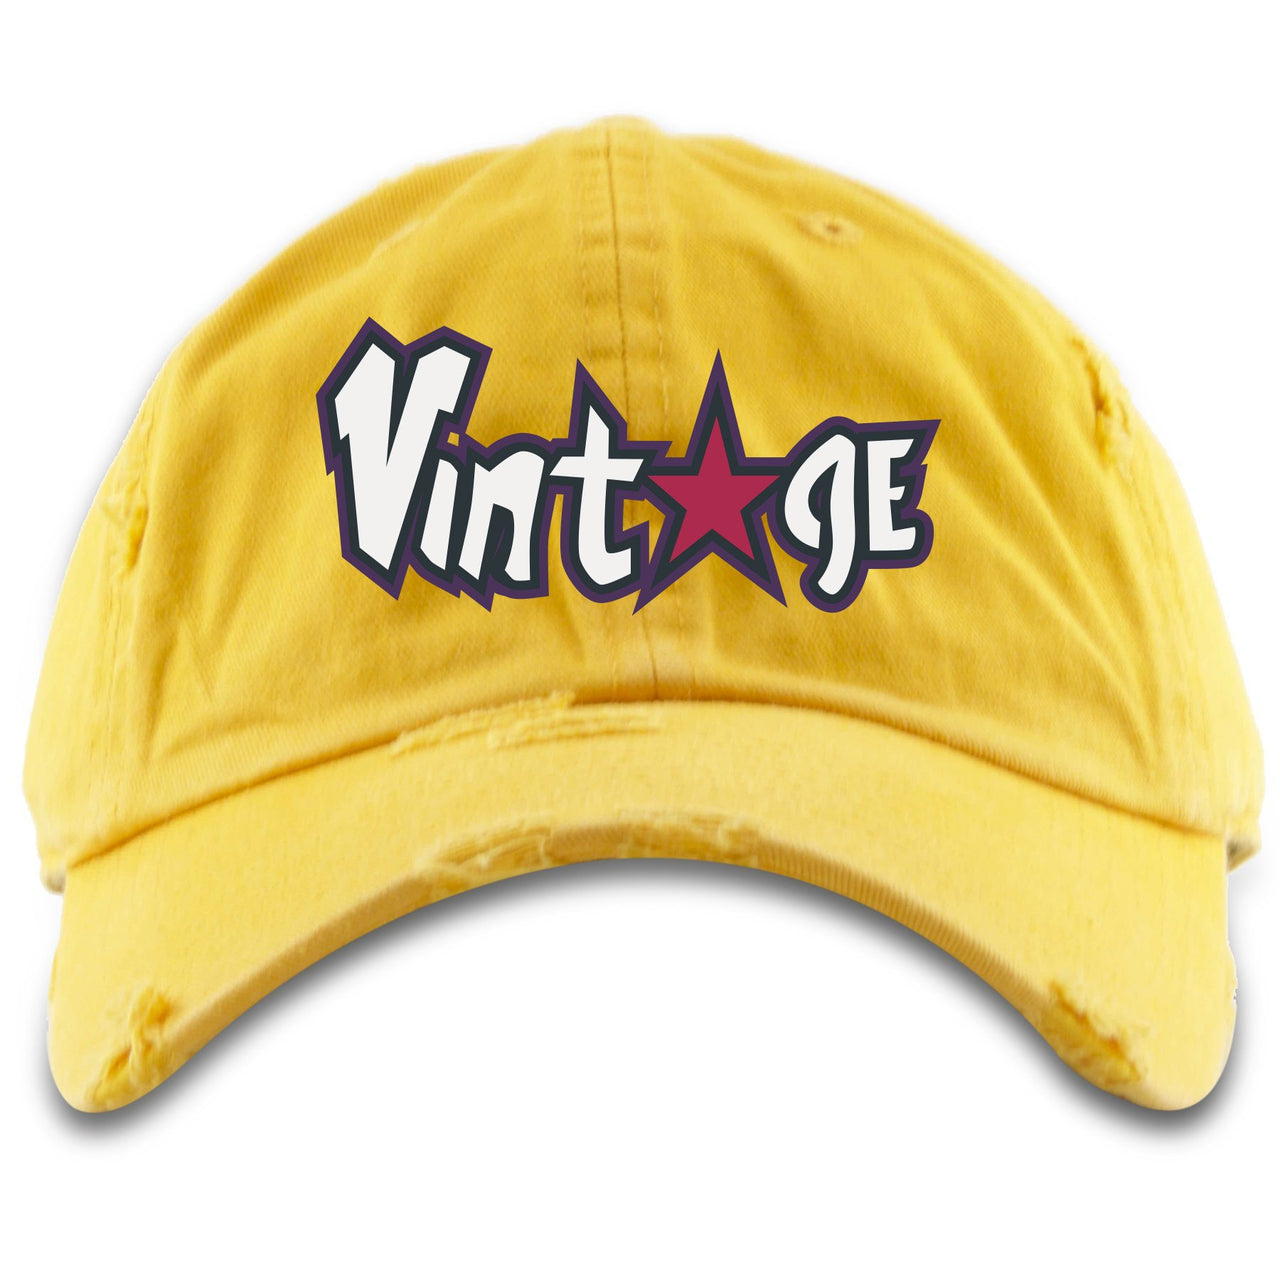 Varsity Maize Mid Blazers Distressed Dad Hat Vintage with Star Logo, Yellow